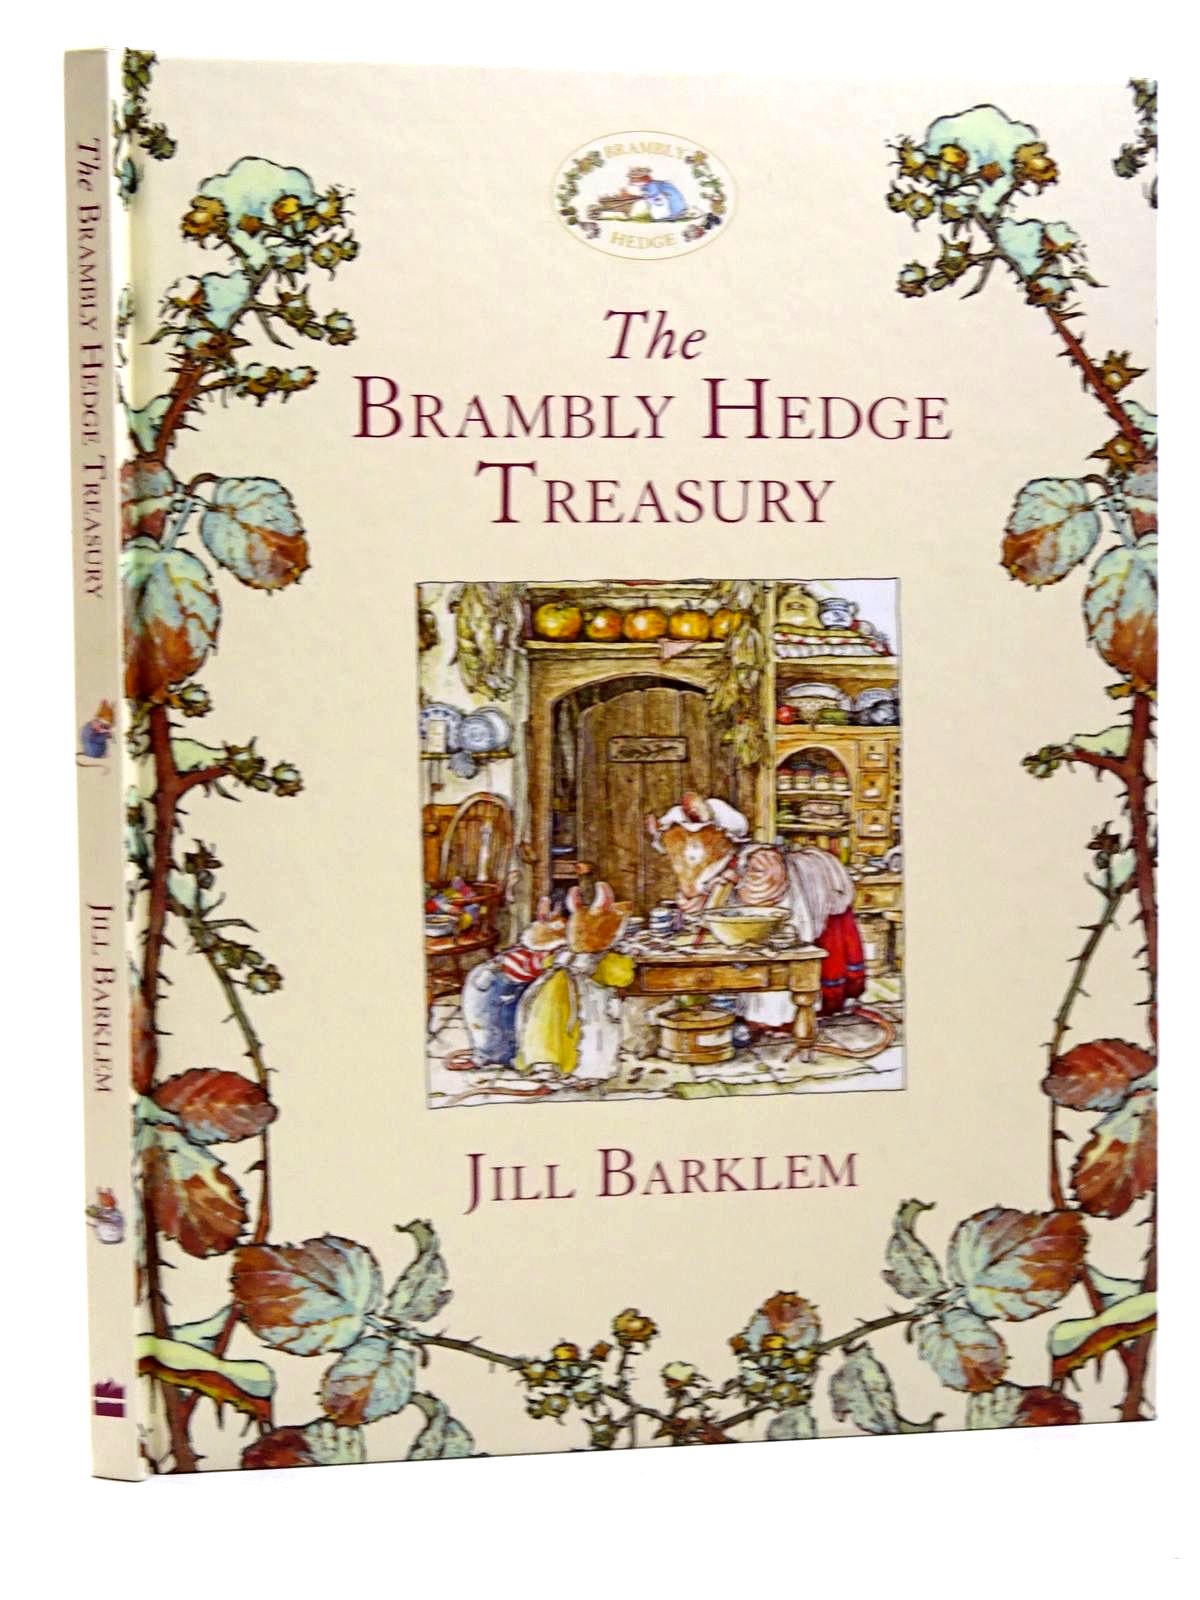 Photo of THE BRAMBLY HEDGE TREASURY written by Barklem, Jill illustrated by Barklem, Jill published by Harper Collins Childrens Books (STOCK CODE: 1317267)  for sale by Stella & Rose's Books